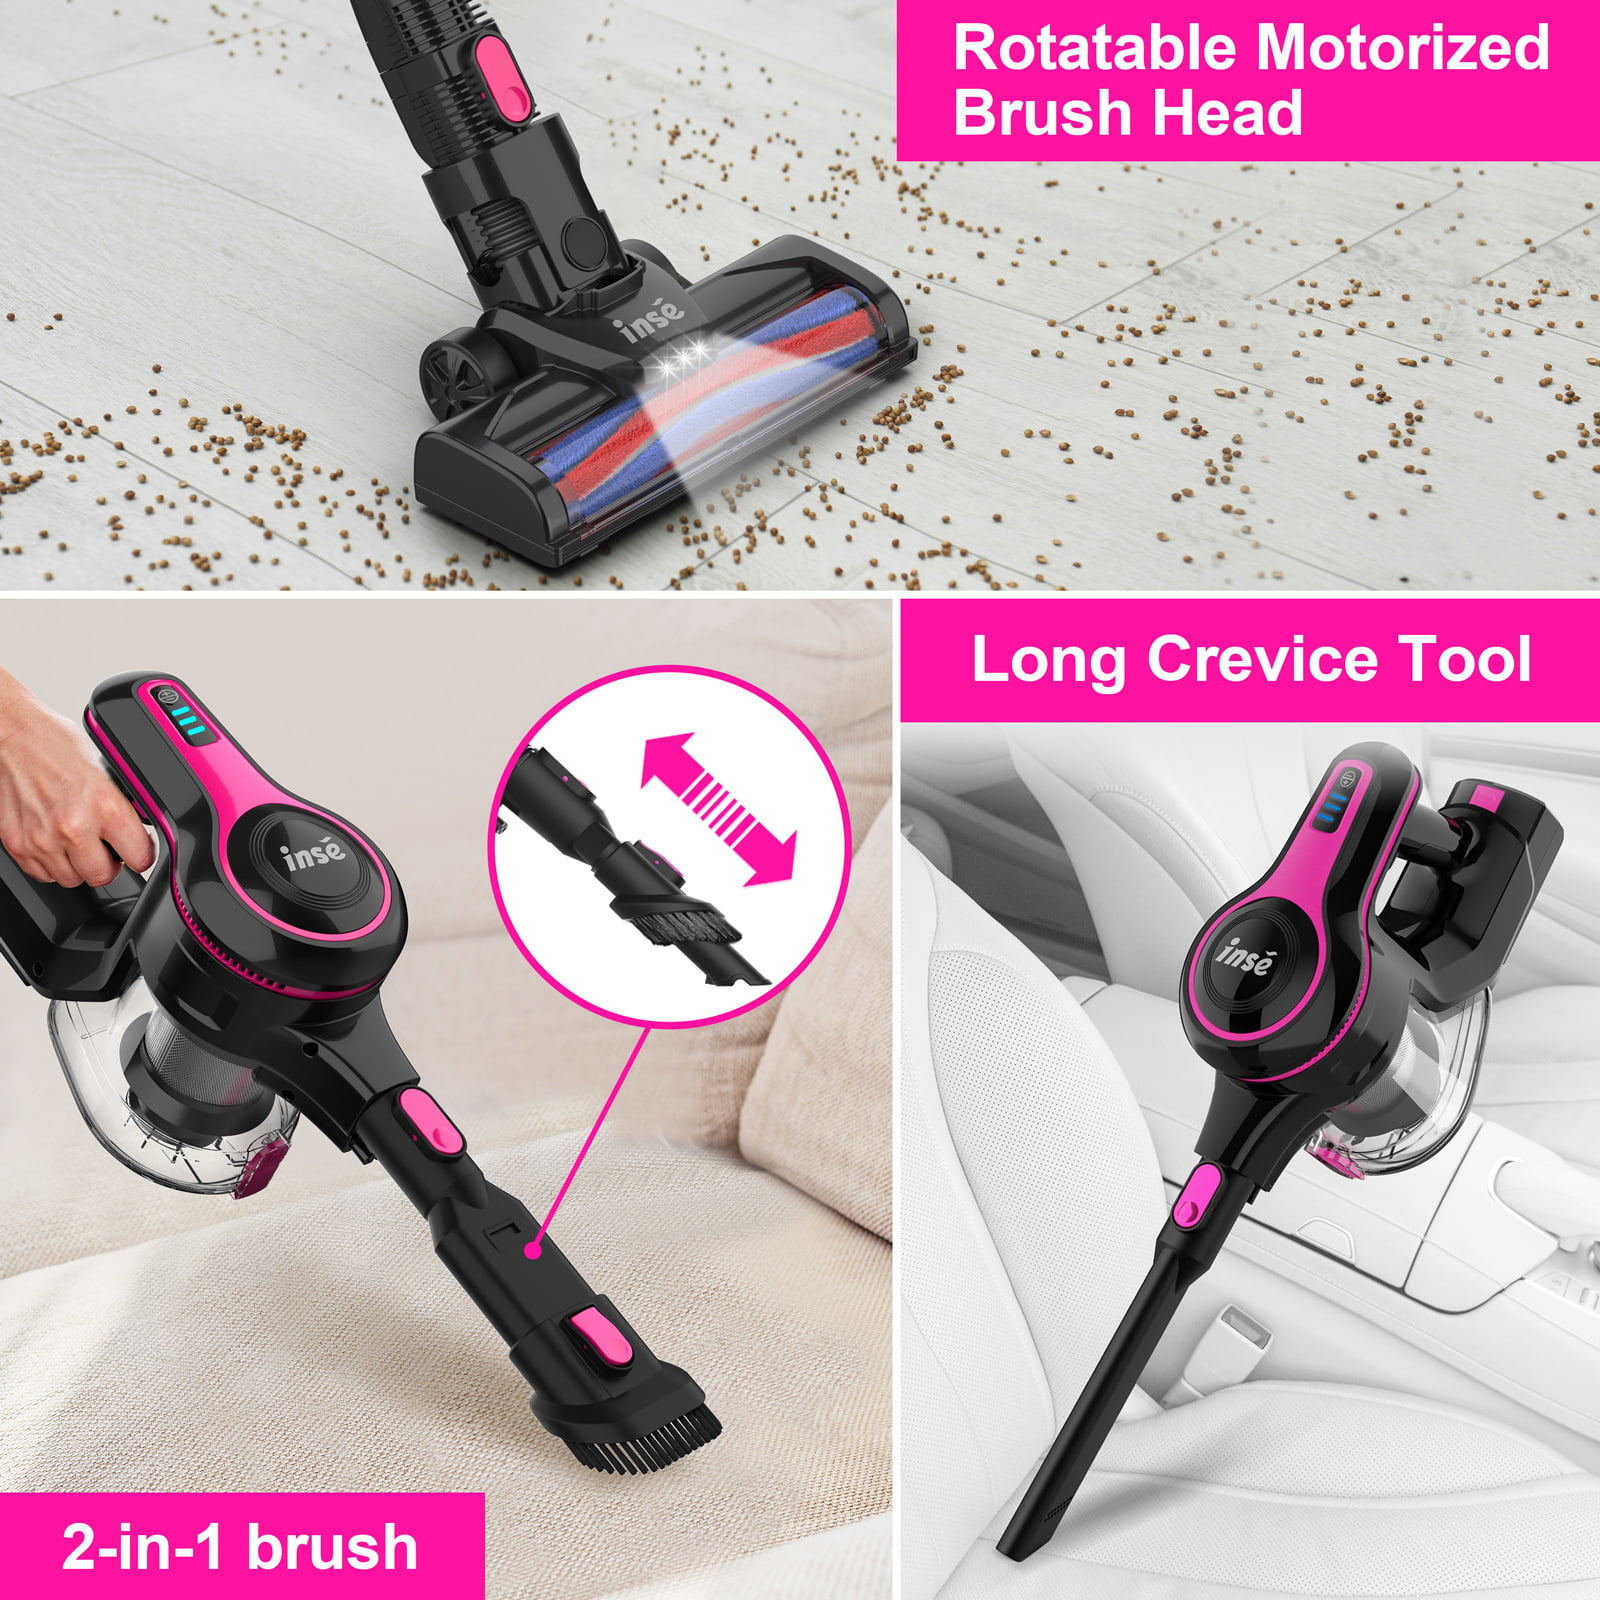 INSE Cordless Vacuum Cleaner, 6 in 1 Powerful Suction Lightweight Stick Vacuum with 2200mAh Rechargeable Battery, Up to 45min Runtime, for Carpet Hardwood Floor Car Pet Hair - 3